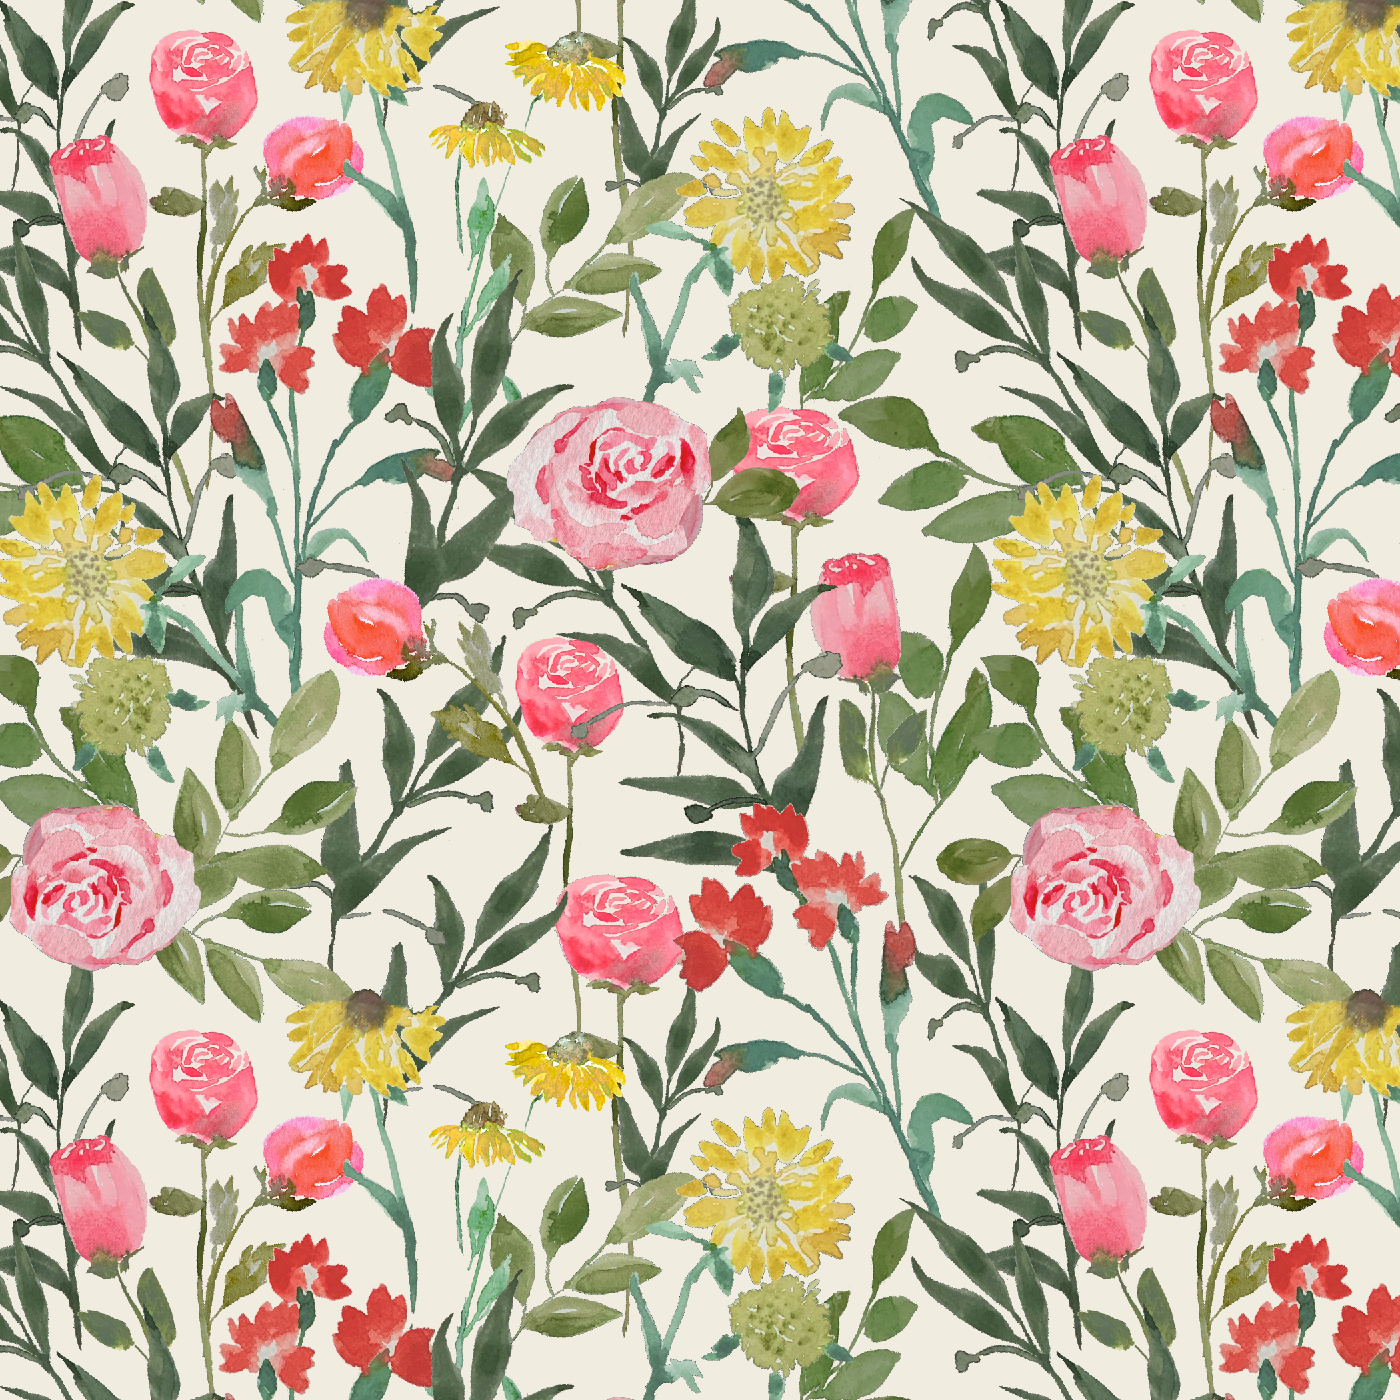 Janet_Hild.watercolor pattern.Roses+Blooms on cream